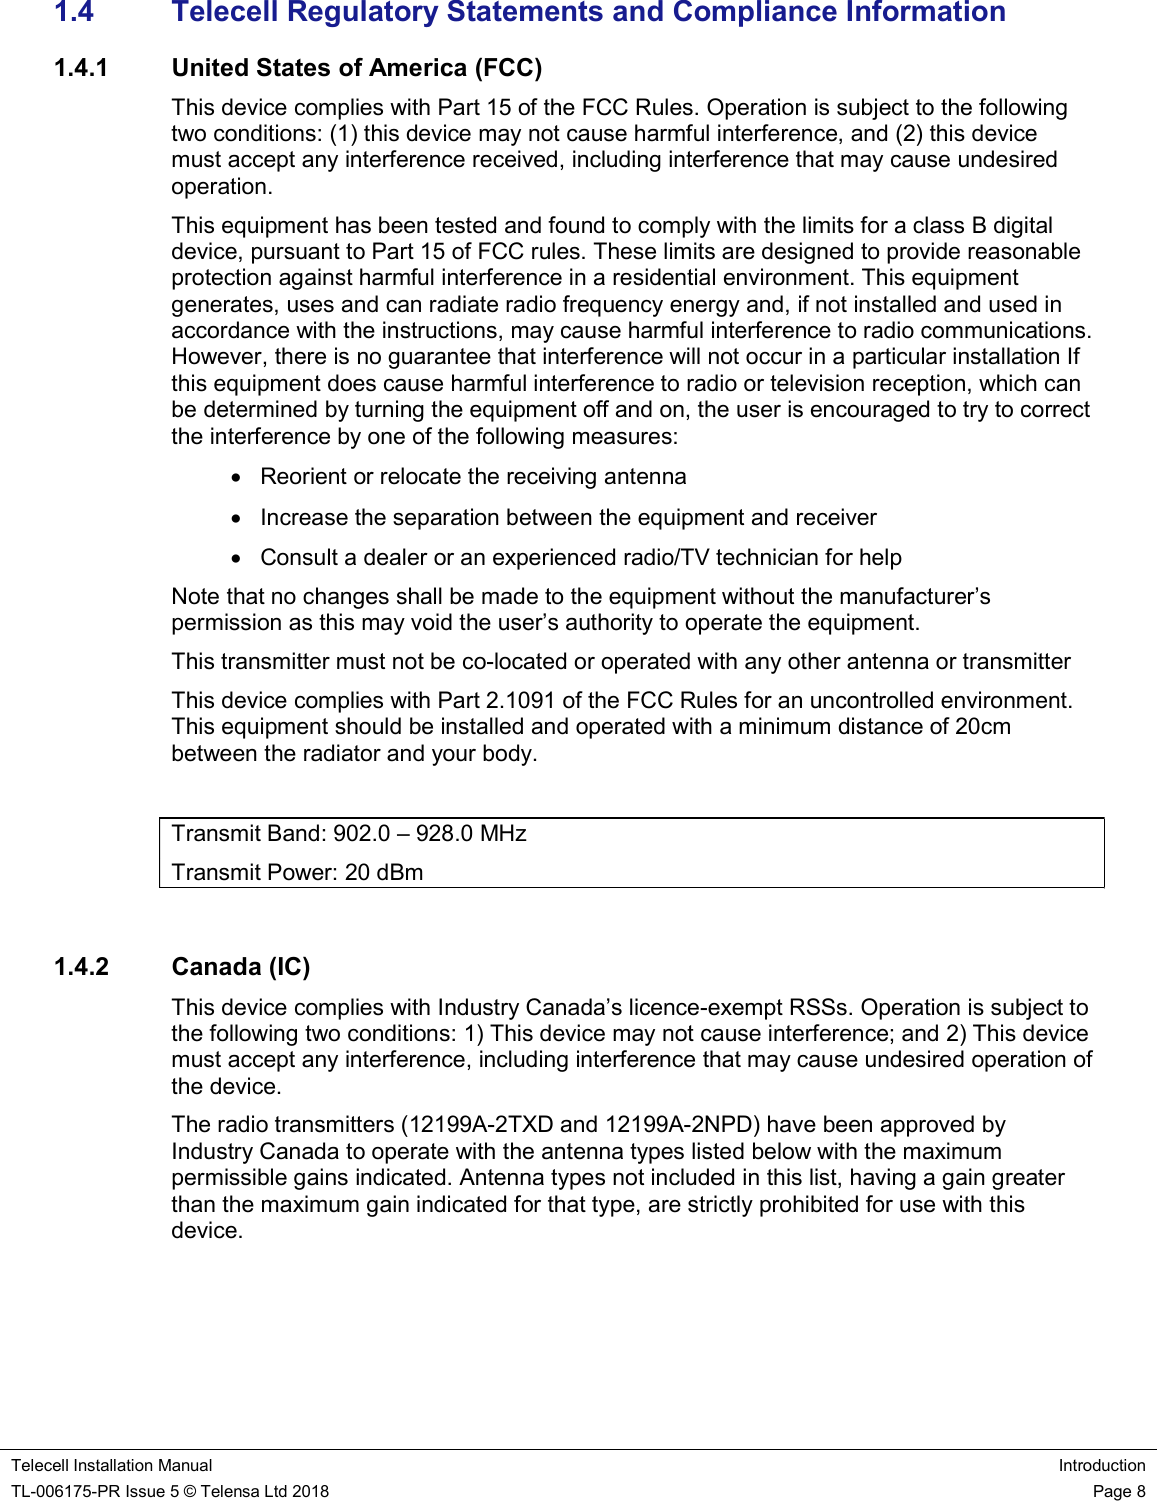    Telecell Installation Manual Introduction TL-006175-PR Issue 5 © Telensa Ltd 2018    Page 8  1.4  Telecell Regulatory Statements and Compliance Information 1.4.1  United States of America (FCC) This device complies with Part 15 of the FCC Rules. Operation is subject to the following two conditions: (1) this device may not cause harmful interference, and (2) this device must accept any interference received, including interference that may cause undesired operation. This equipment has been tested and found to comply with the limits for a class B digital device, pursuant to Part 15 of FCC rules. These limits are designed to provide reasonable protection against harmful interference in a residential environment. This equipment generates, uses and can radiate radio frequency energy and, if not installed and used in accordance with the instructions, may cause harmful interference to radio communications. However, there is no guarantee that interference will not occur in a particular installation If this equipment does cause harmful interference to radio or television reception, which can be determined by turning the equipment off and on, the user is encouraged to try to correct the interference by one of the following measures:   Reorient or relocate the receiving antenna   Increase the separation between the equipment and receiver   Consult a dealer or an experienced radio/TV technician for help Note that no changes shall be made to the equipment without the manufacturer’s permission as this may void the user’s authority to operate the equipment. This transmitter must not be co-located or operated with any other antenna or transmitter This device complies with Part 2.1091 of the FCC Rules for an uncontrolled environment. This equipment should be installed and operated with a minimum distance of 20cm between the radiator and your body.  Transmit Band: 902.0 – 928.0 MHz Transmit Power: 20 dBm  1.4.2  Canada (IC) This device complies with Industry Canada’s licence-exempt RSSs. Operation is subject to the following two conditions: 1) This device may not cause interference; and 2) This device must accept any interference, including interference that may cause undesired operation of the device. The radio transmitters (12199A-2TXD and 12199A-2NPD) have been approved by Industry Canada to operate with the antenna types listed below with the maximum permissible gains indicated. Antenna types not included in this list, having a gain greater than the maximum gain indicated for that type, are strictly prohibited for use with this device. 